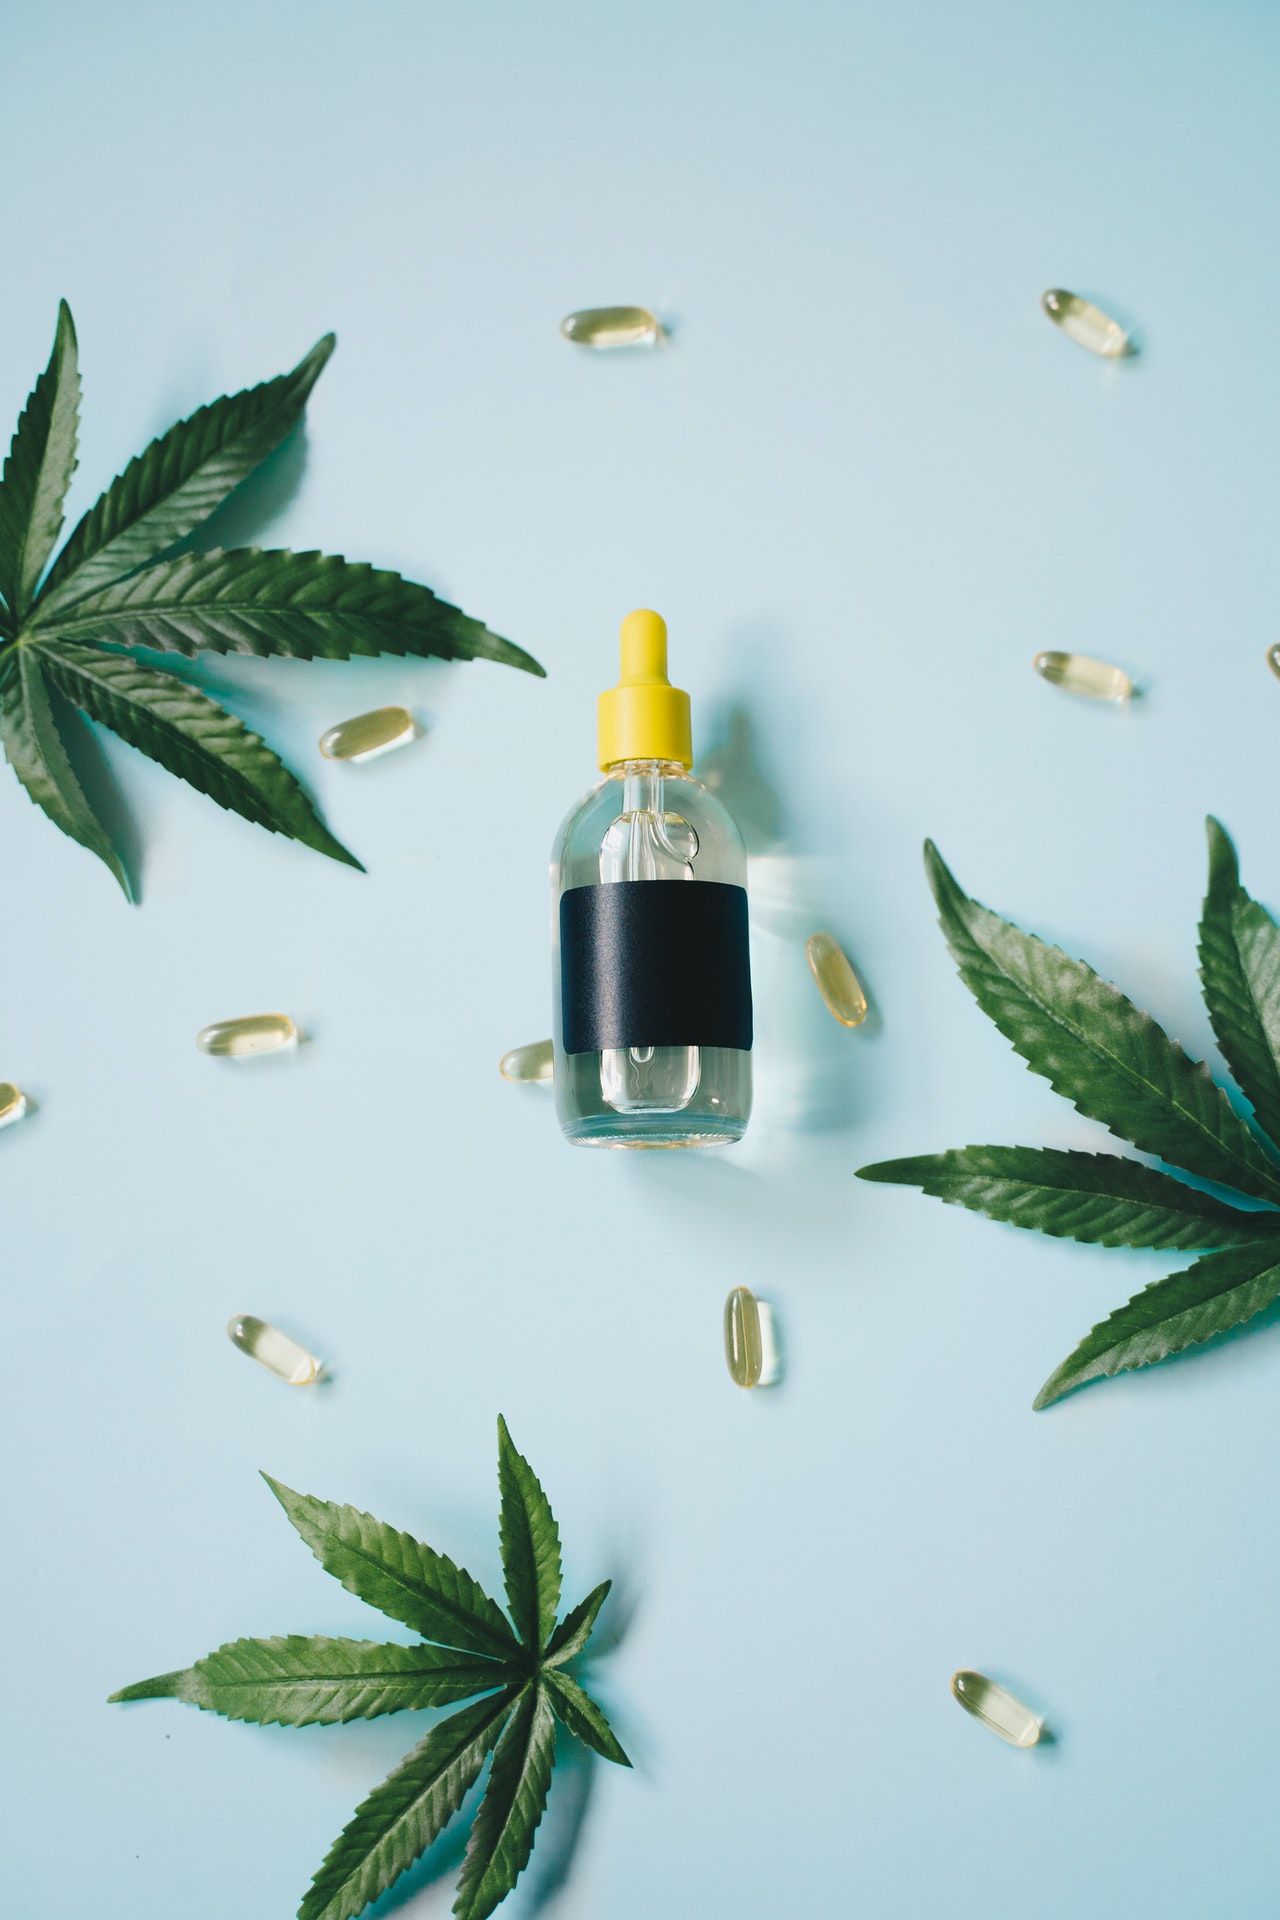 Need Glowing skin for a date? CBD Is Oil Becoming The Next Big Beauty Trend